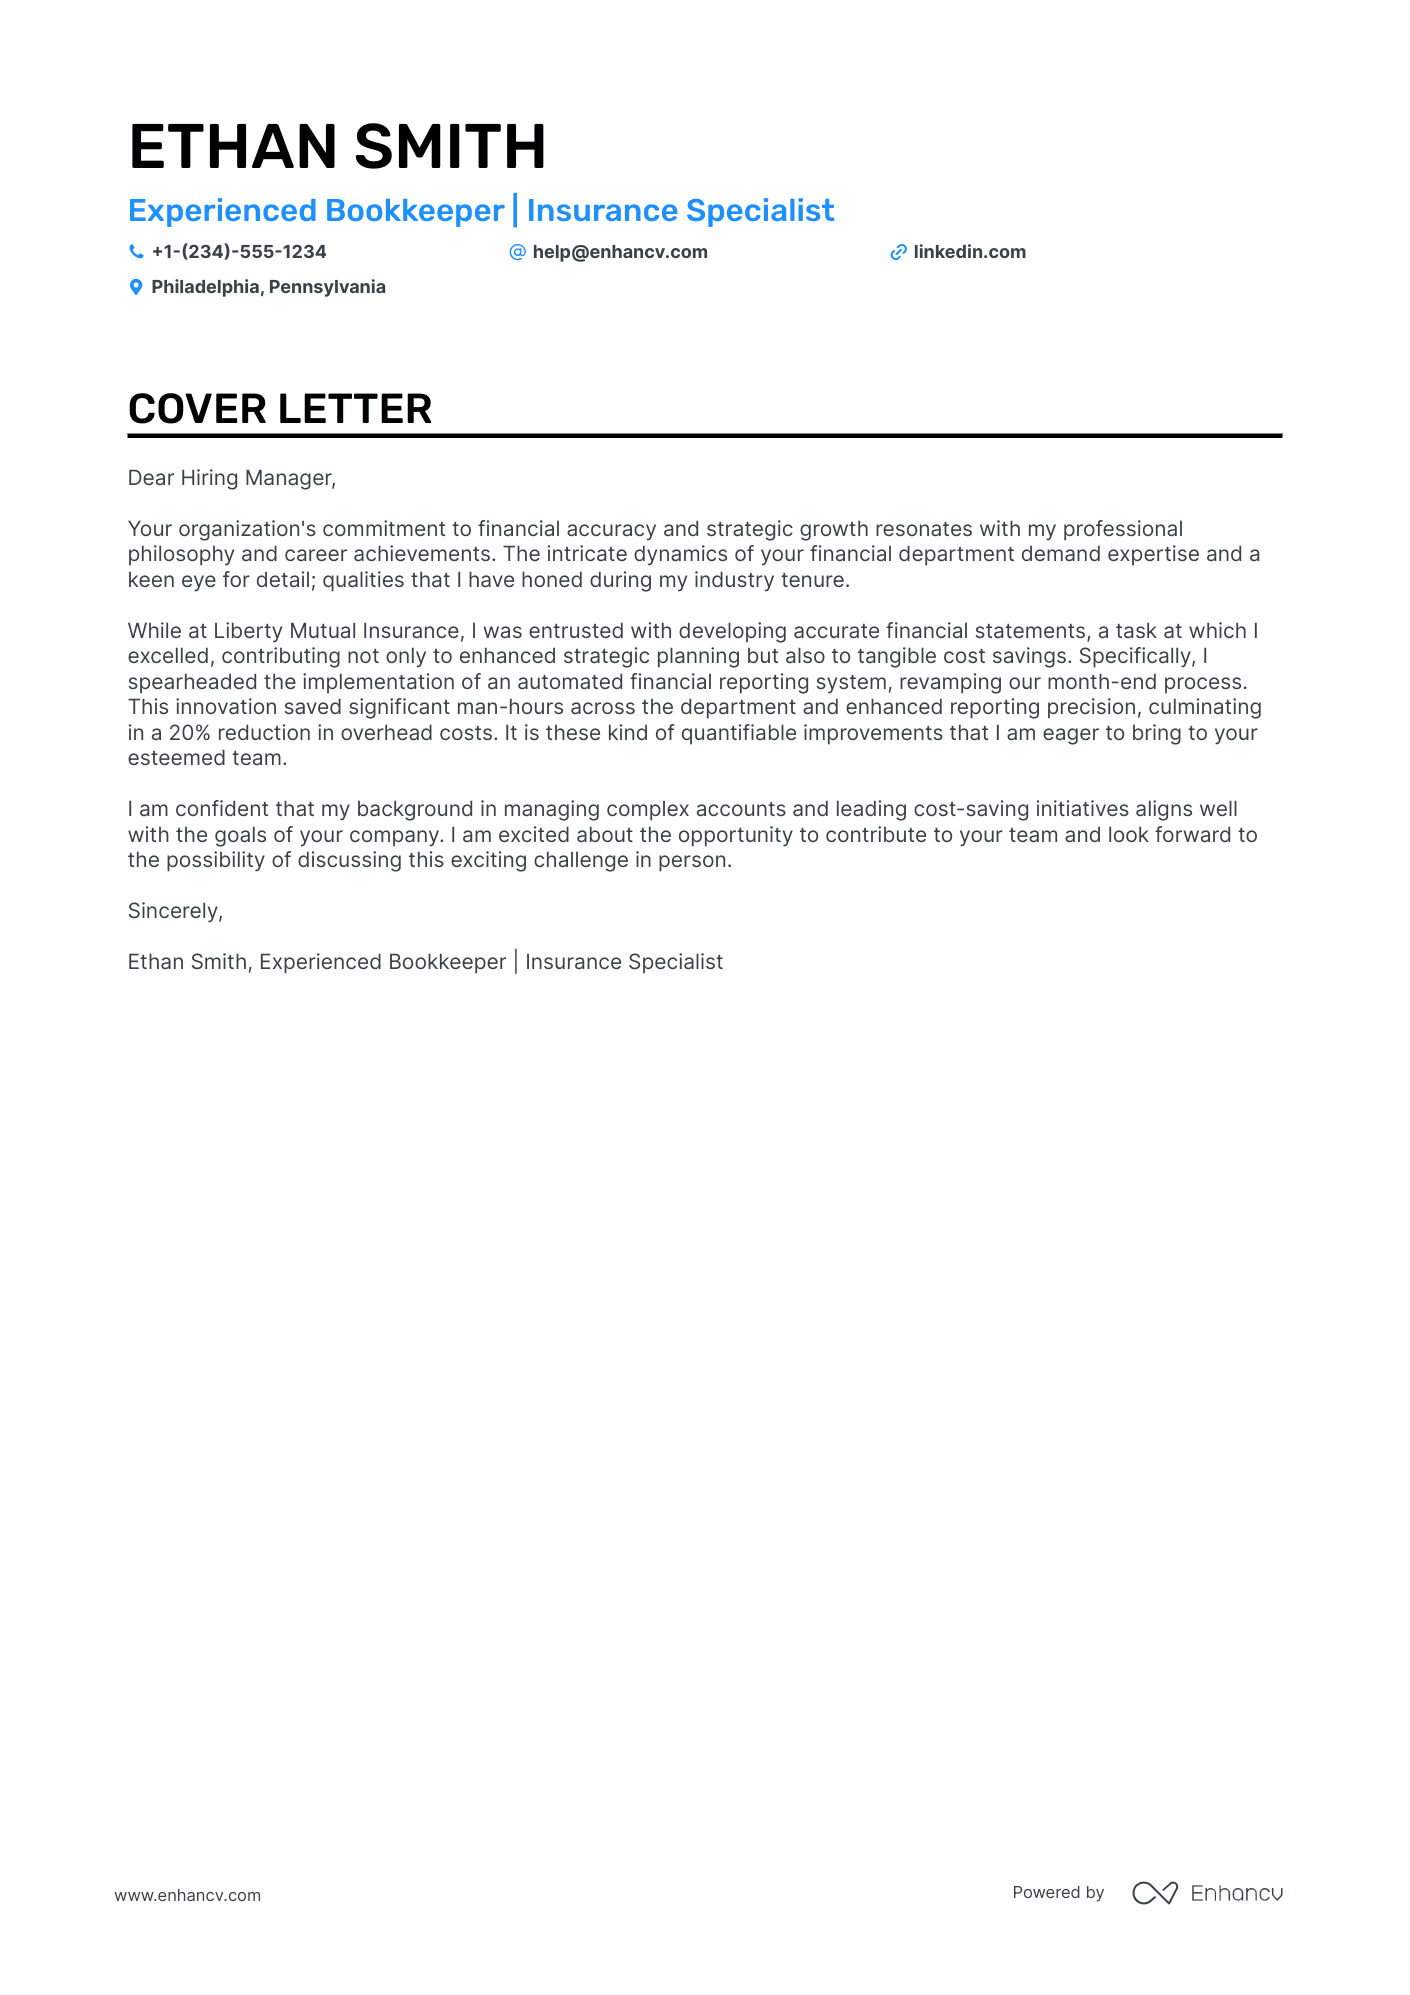 how to write a cover letter for bookkeeper